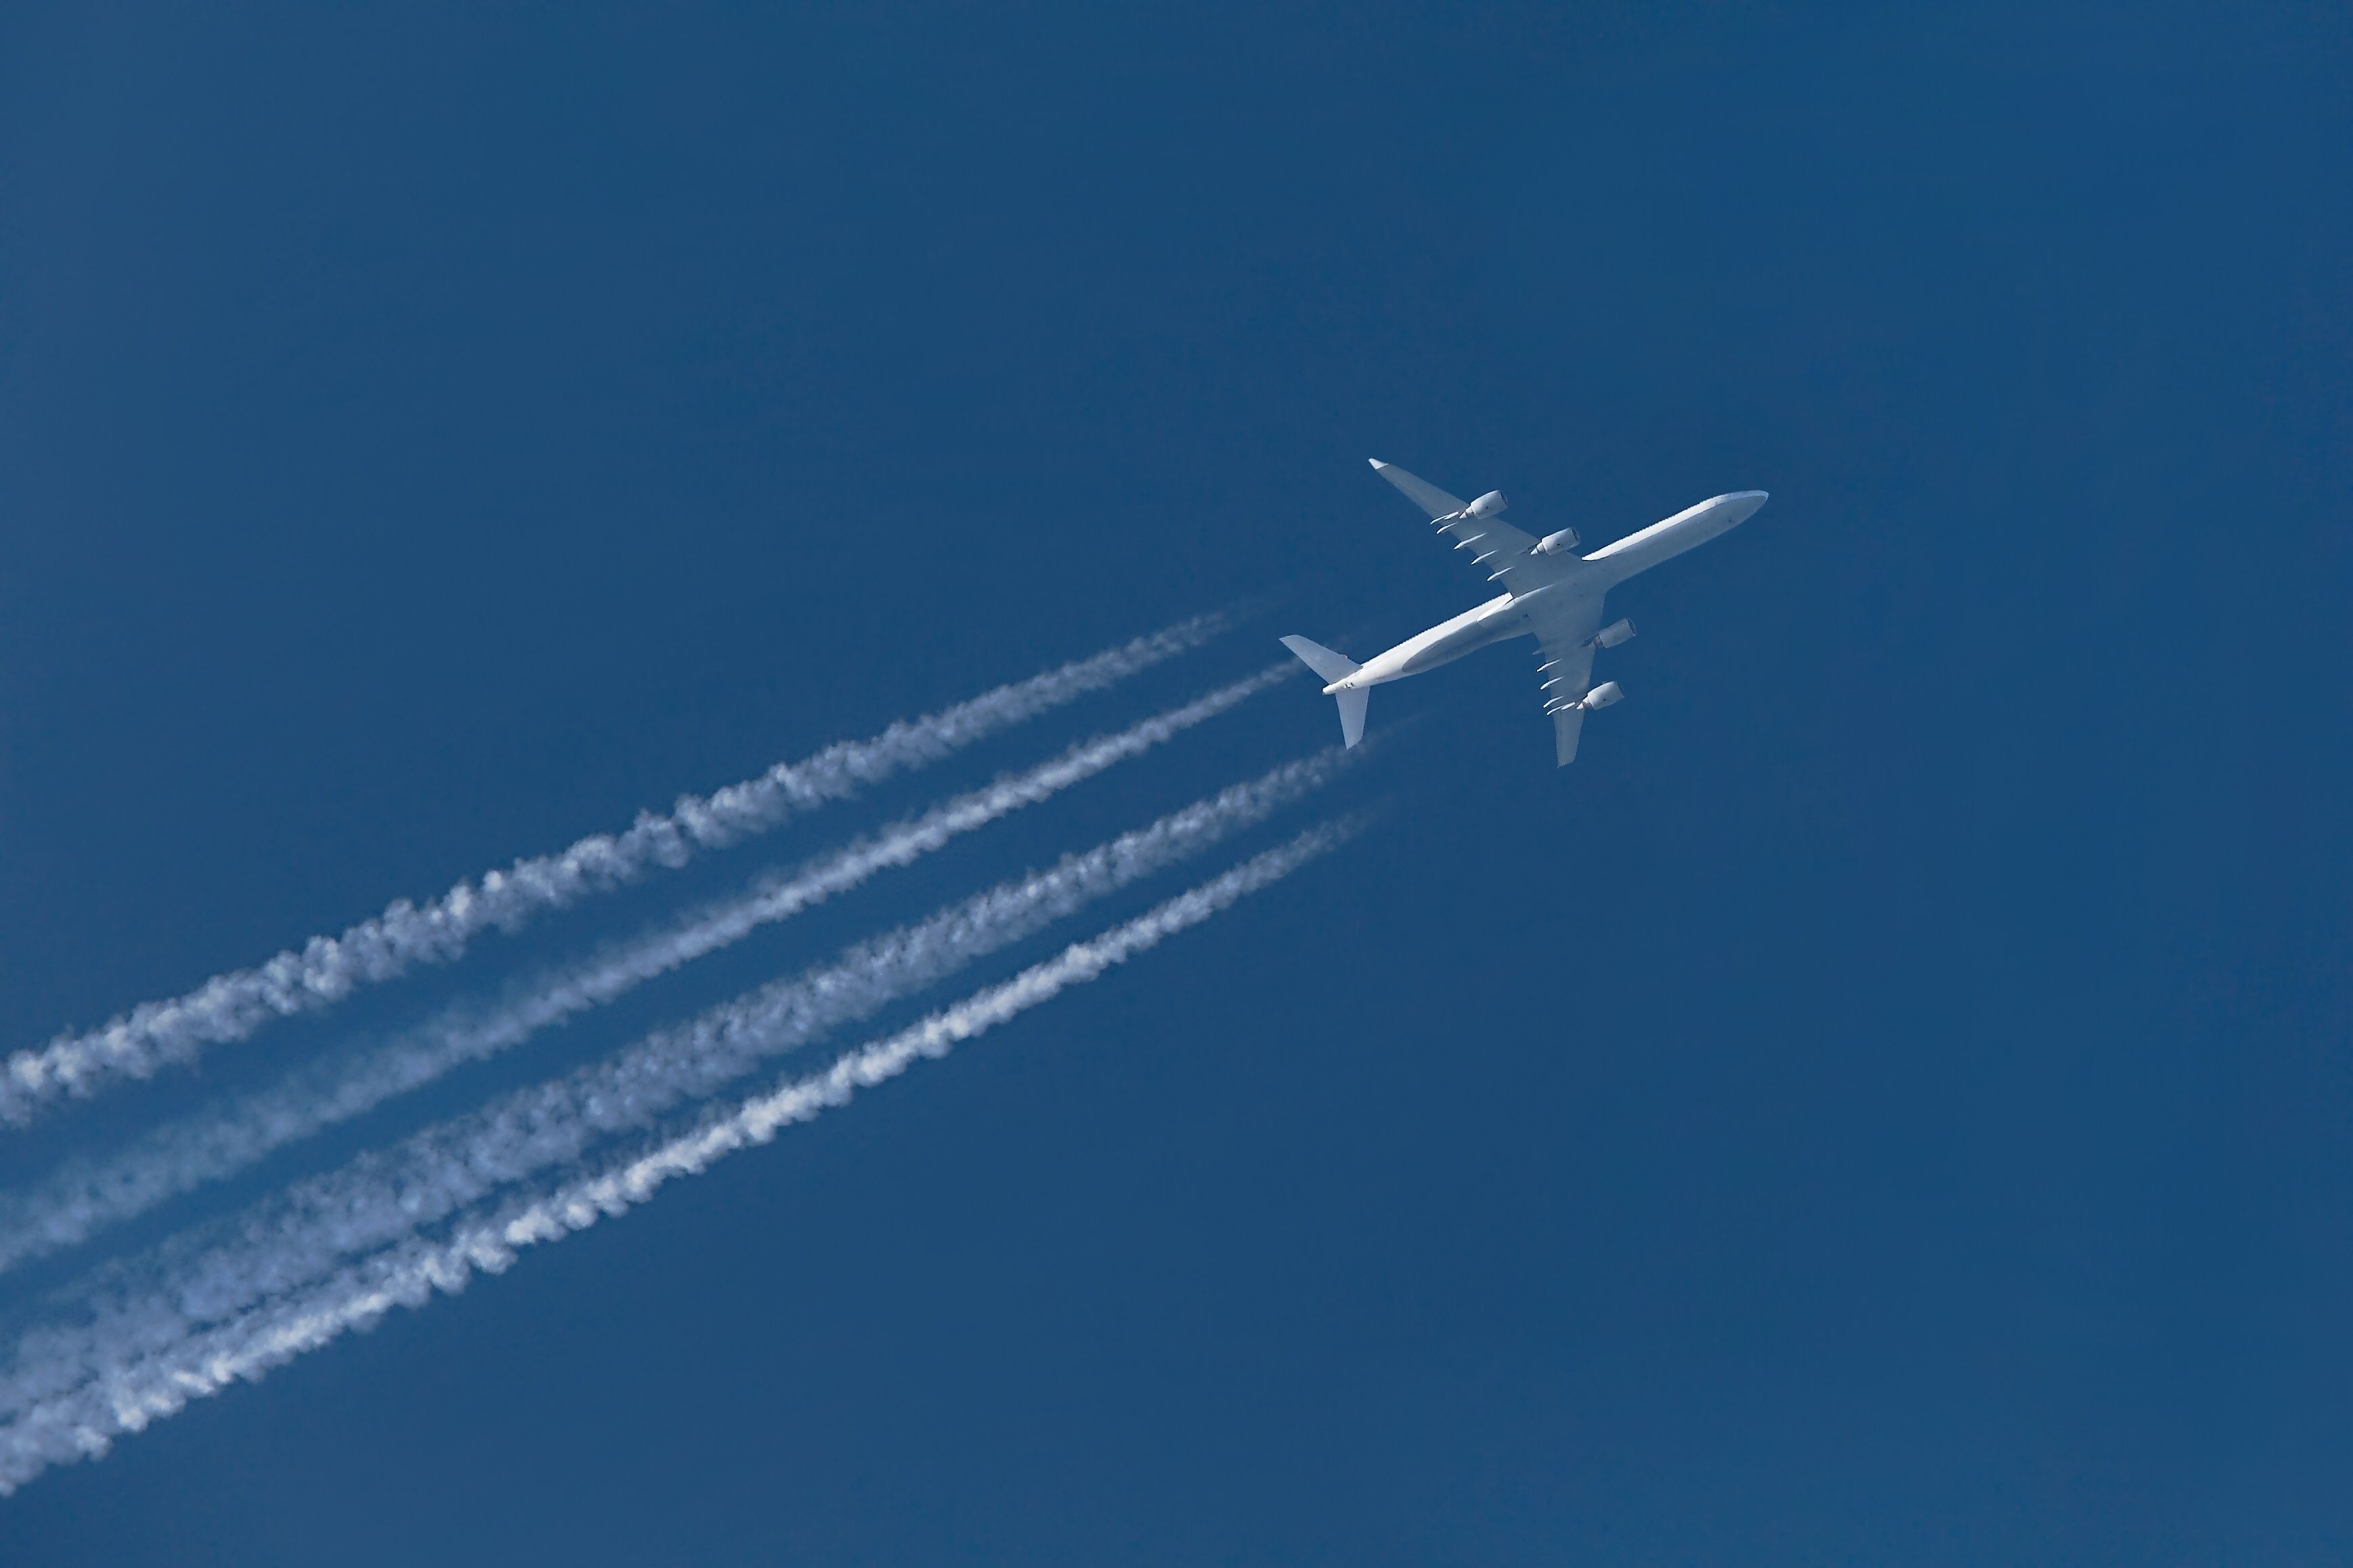 quadjet with contrails in the sky